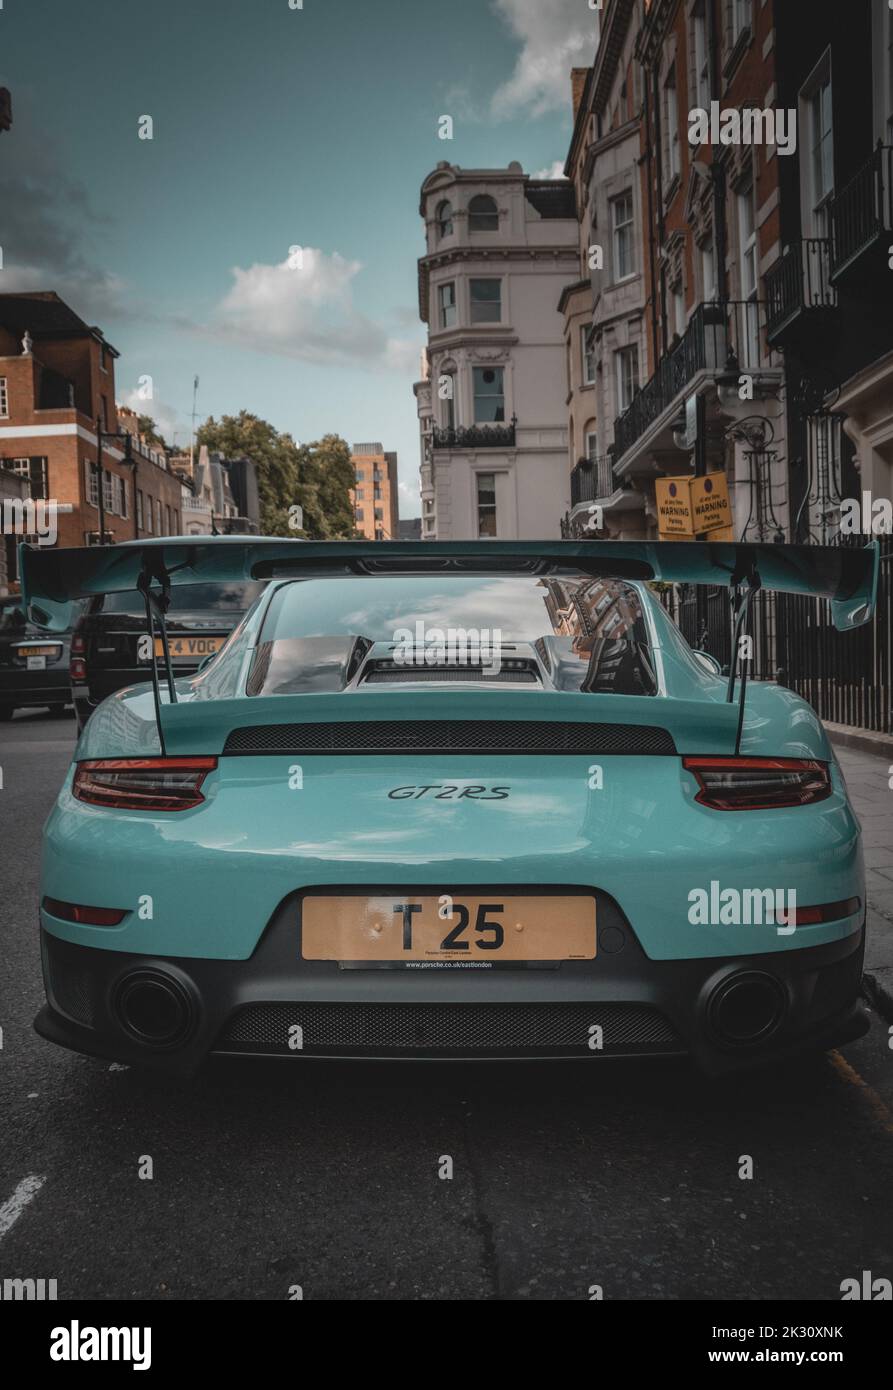 Crazy and beautiful Porsches spotted around London. Rainy and moody days making them look the best. Stock Photo